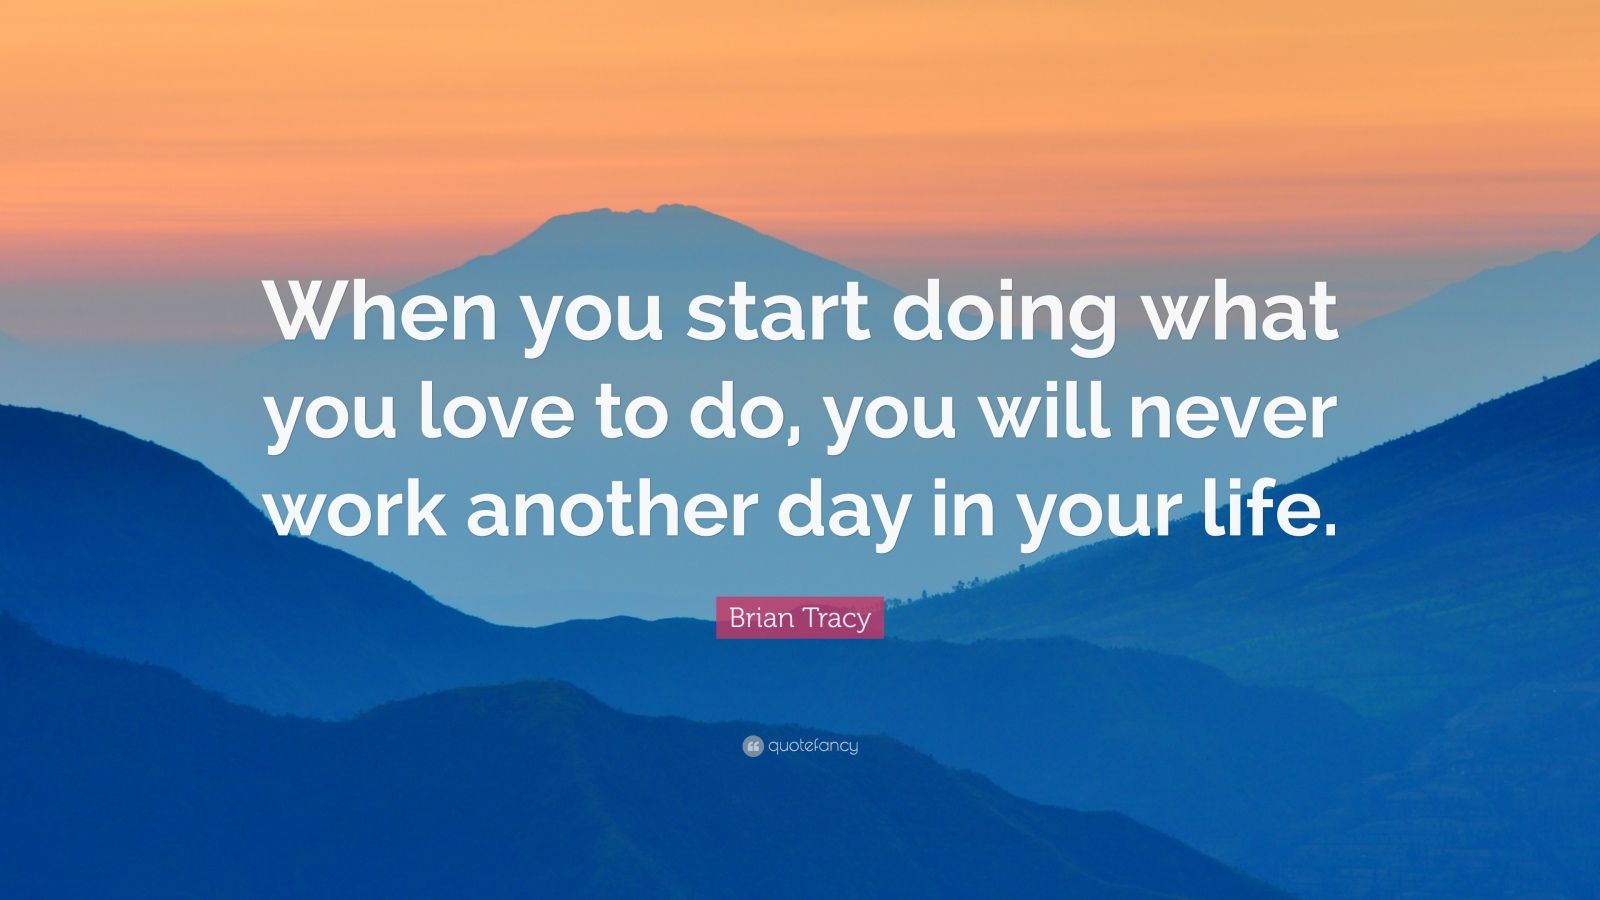 Brian Tracy Quote: “When you start doing what you love to do, you will